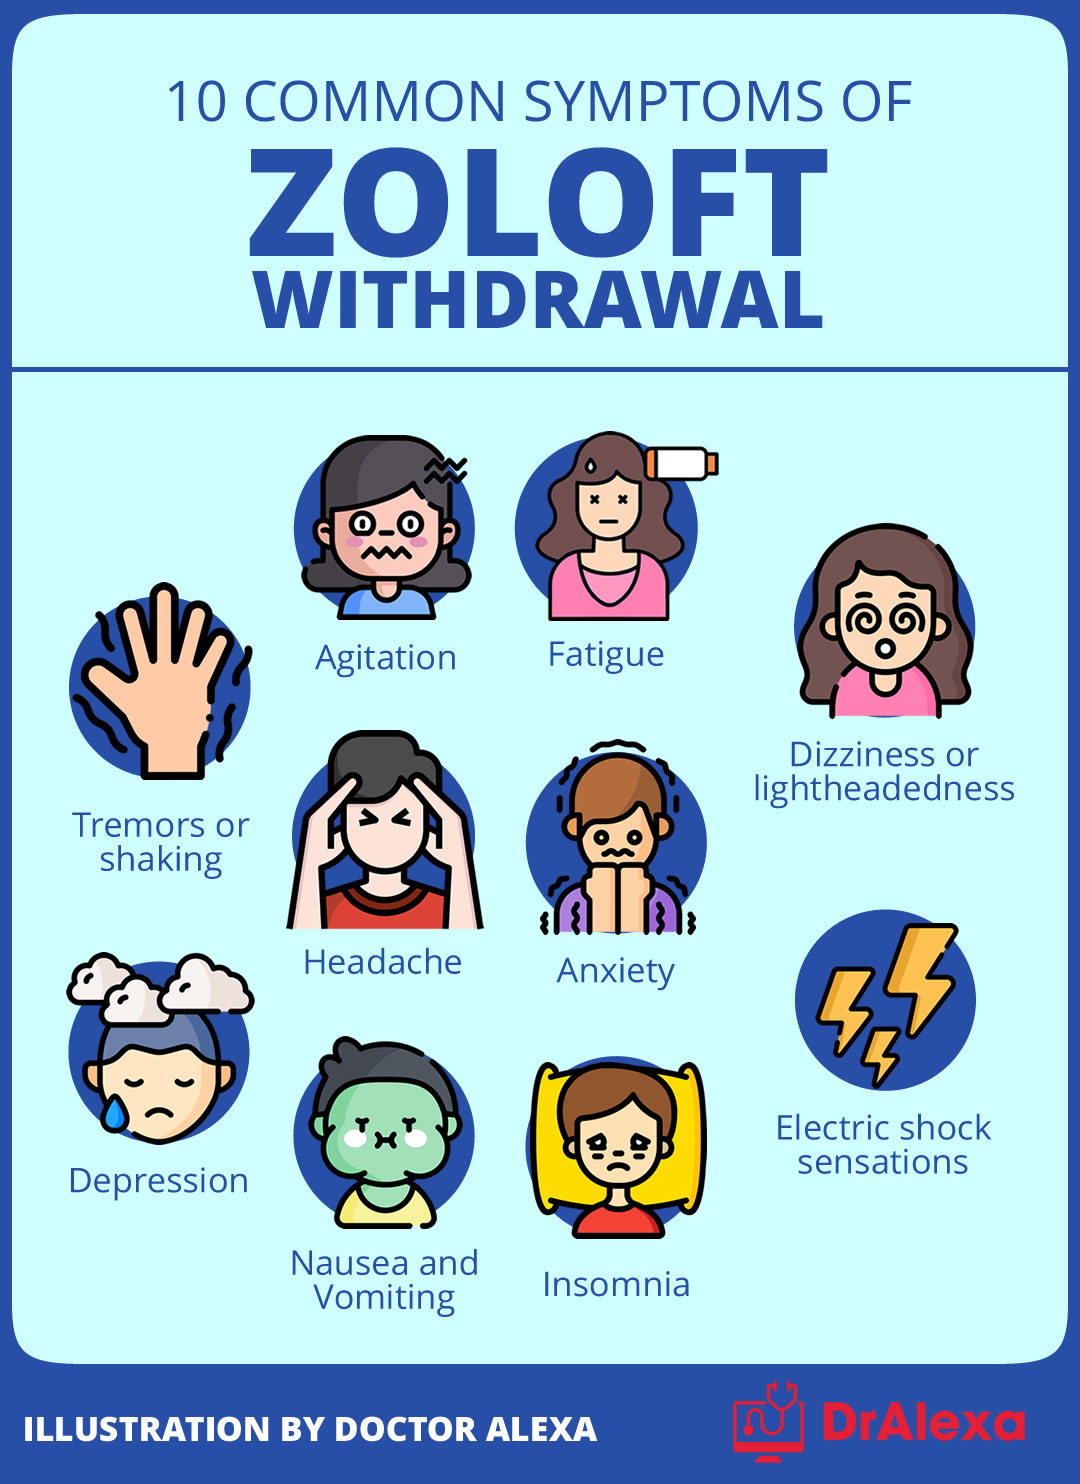 10 common symptoms of zoloft withdrawal